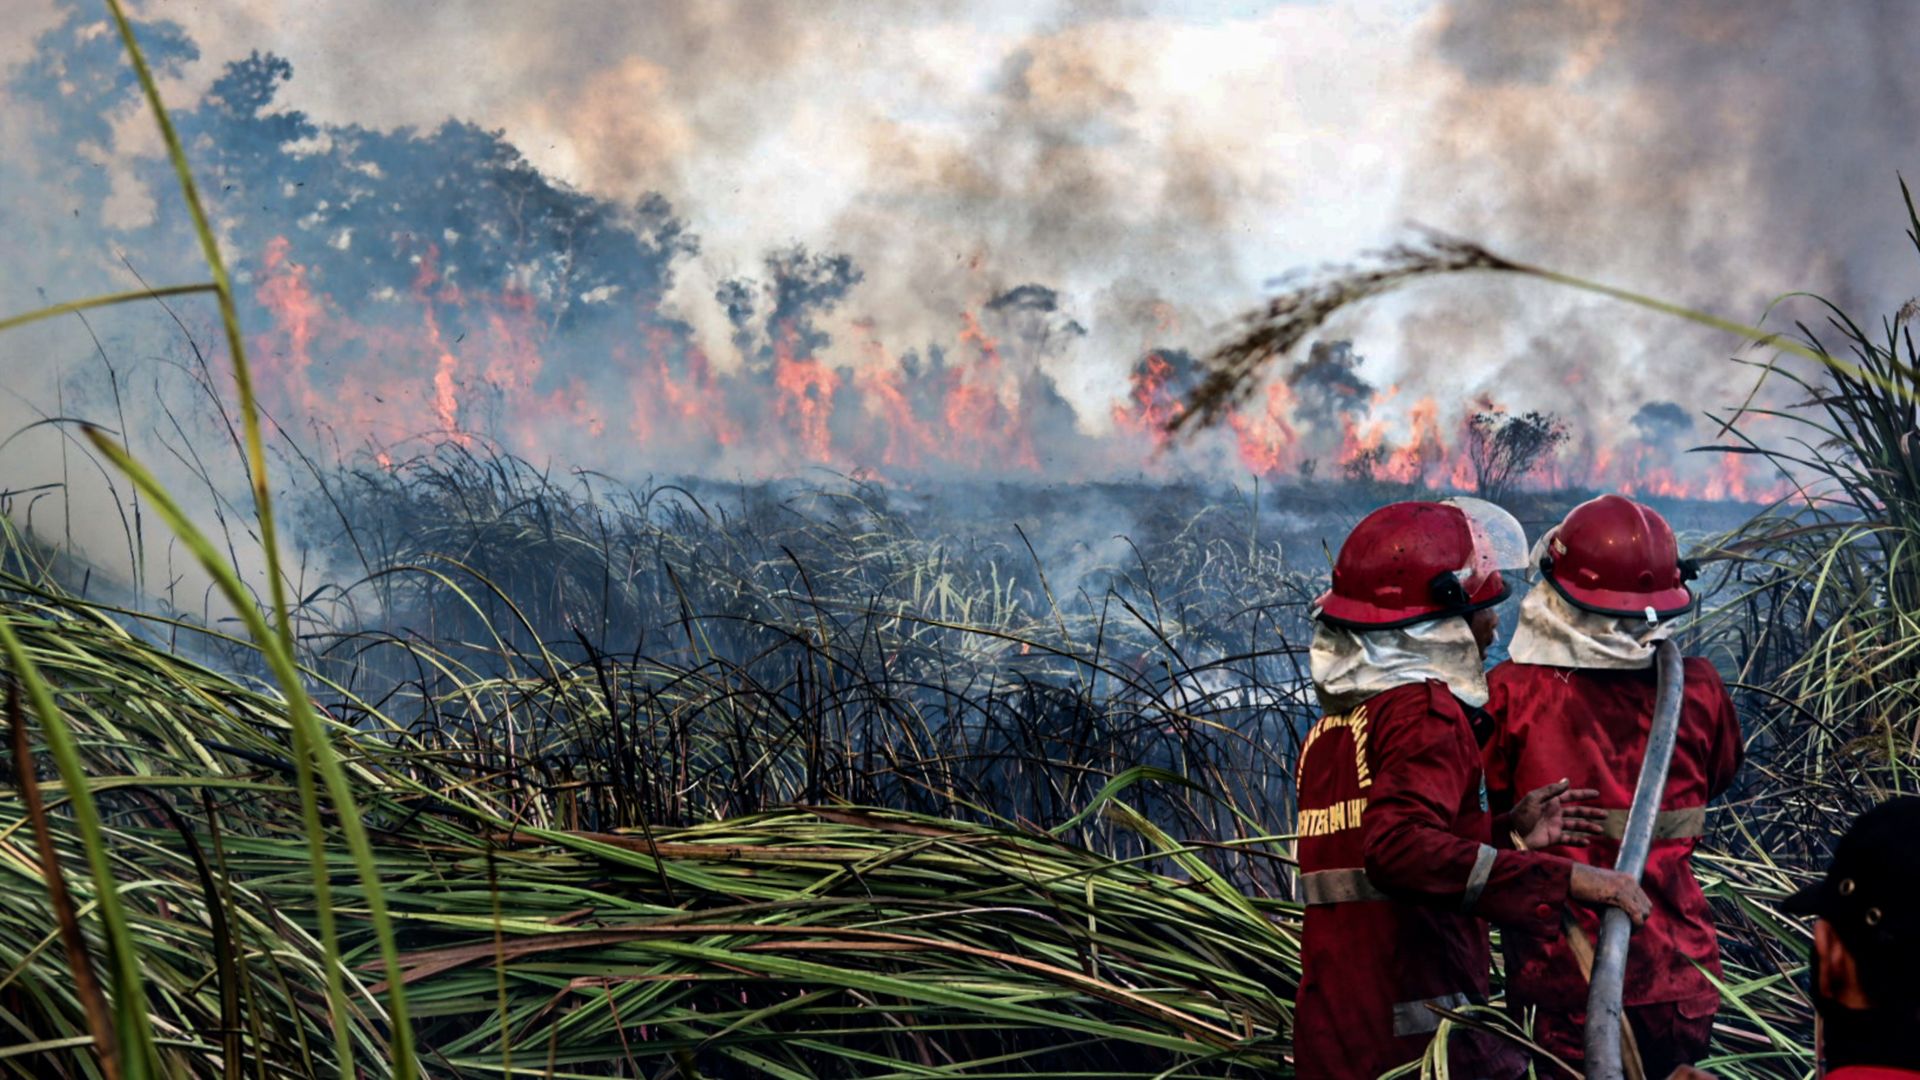 Firefighters work to extinguish a peat fire in South Sumatra, Indonesia in 2021